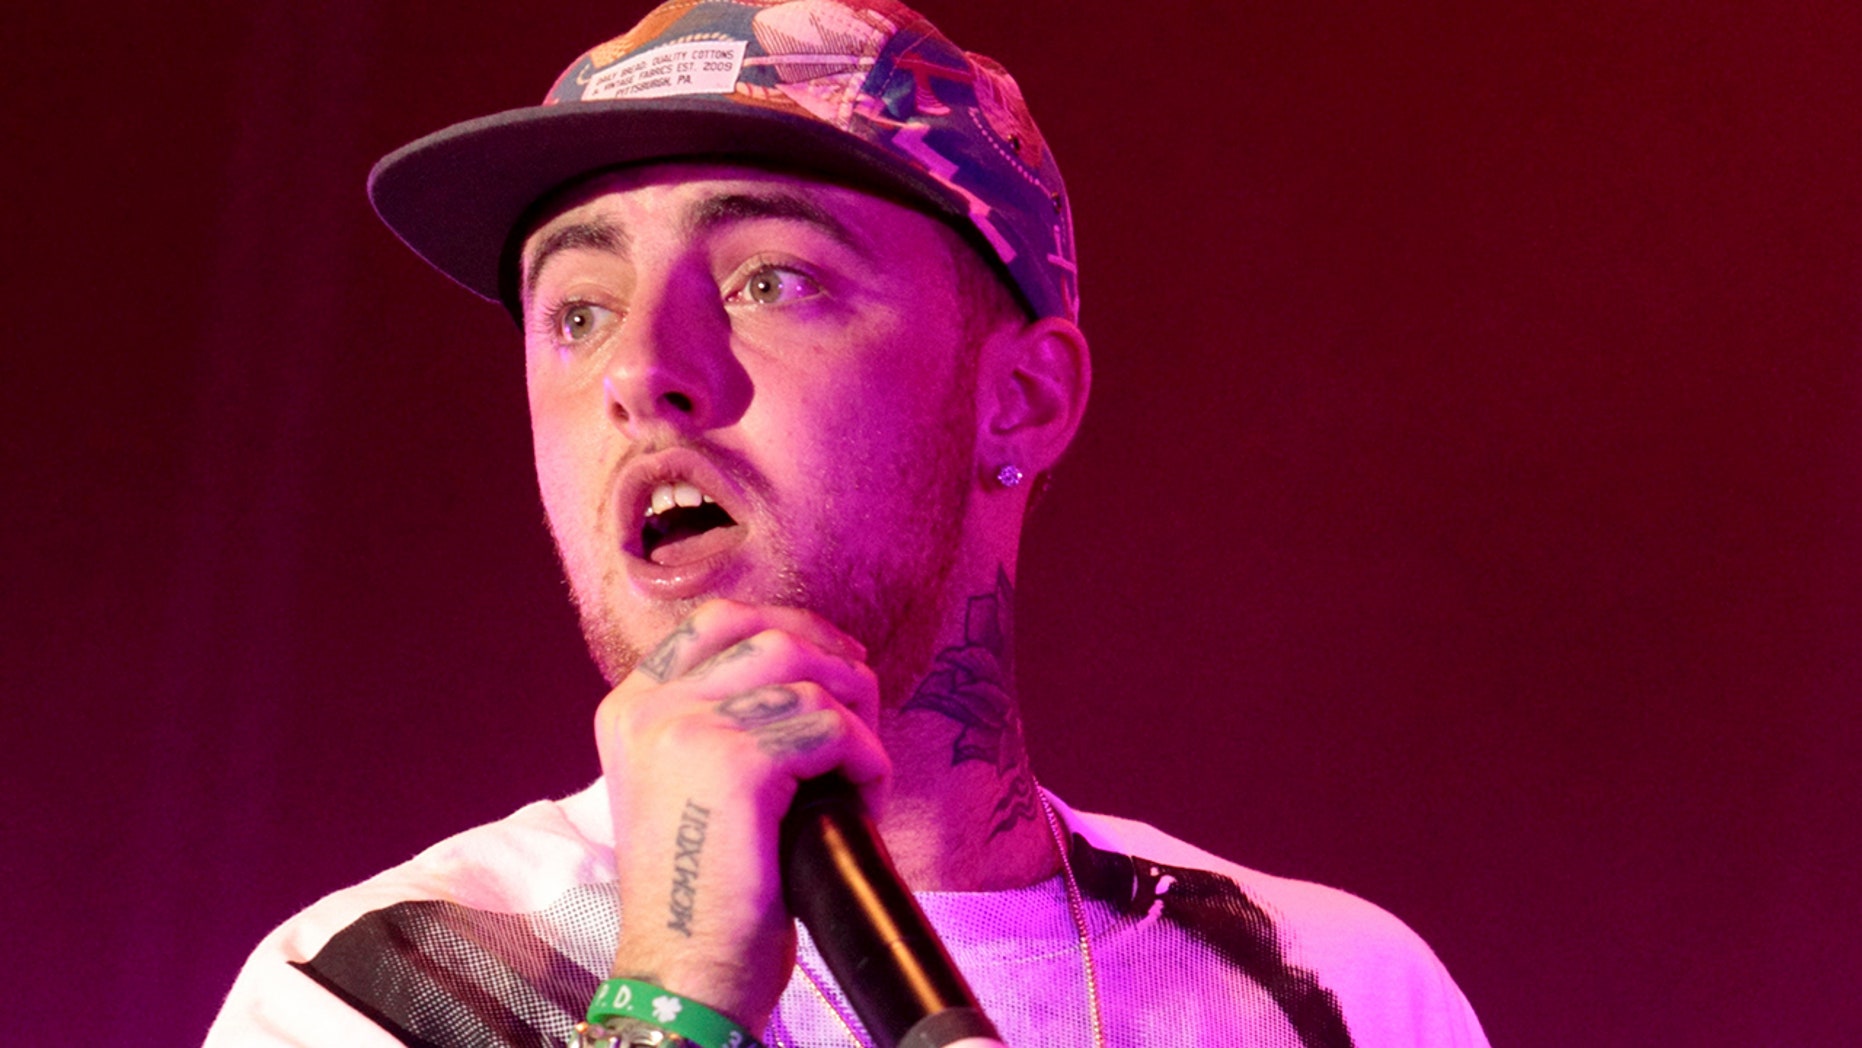 Mac Miller was dead hours before body was found: report ...